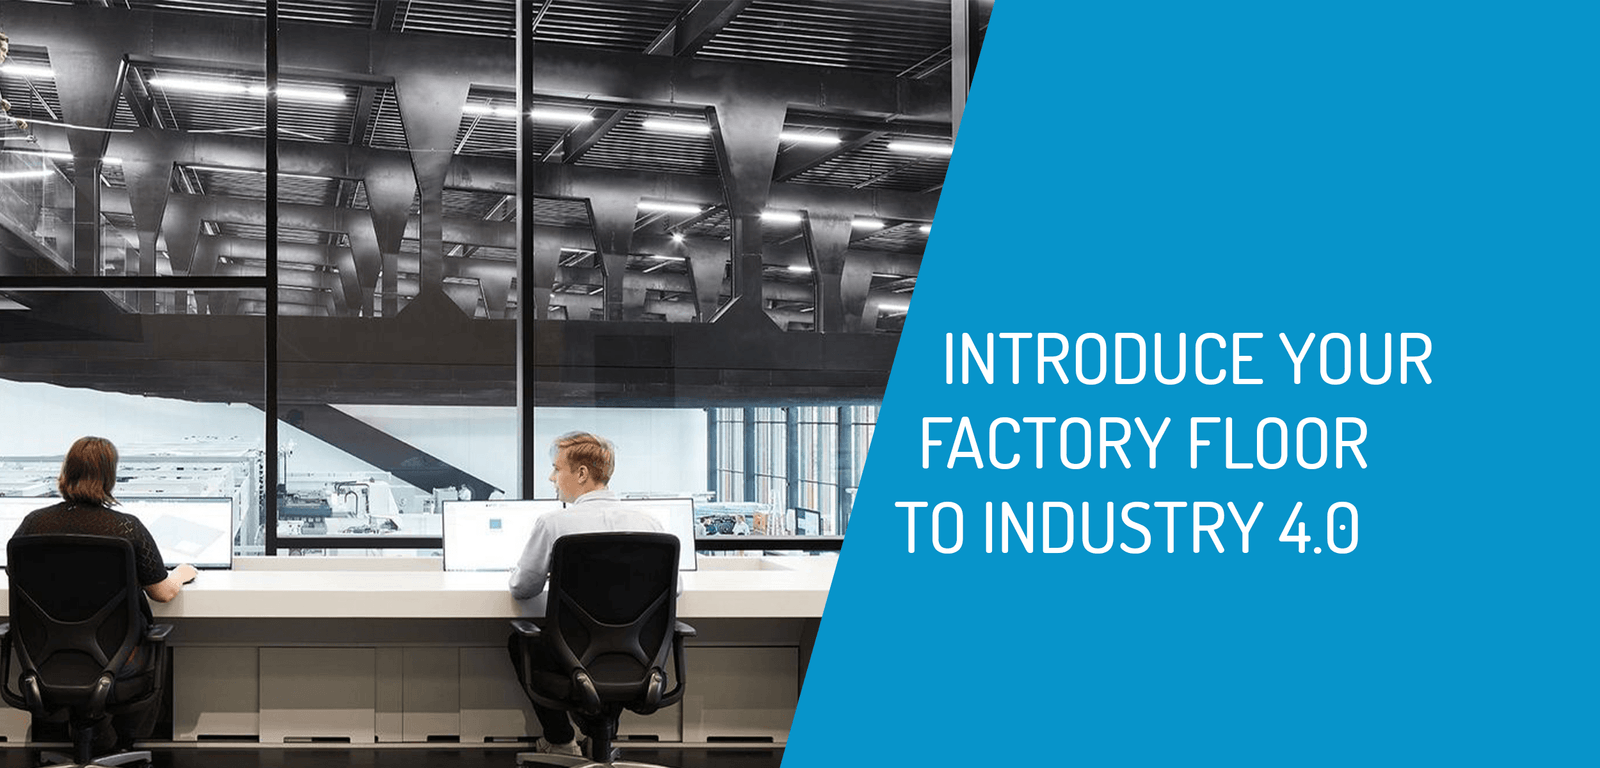 Introduce your Factory Floor to Industry 4.0